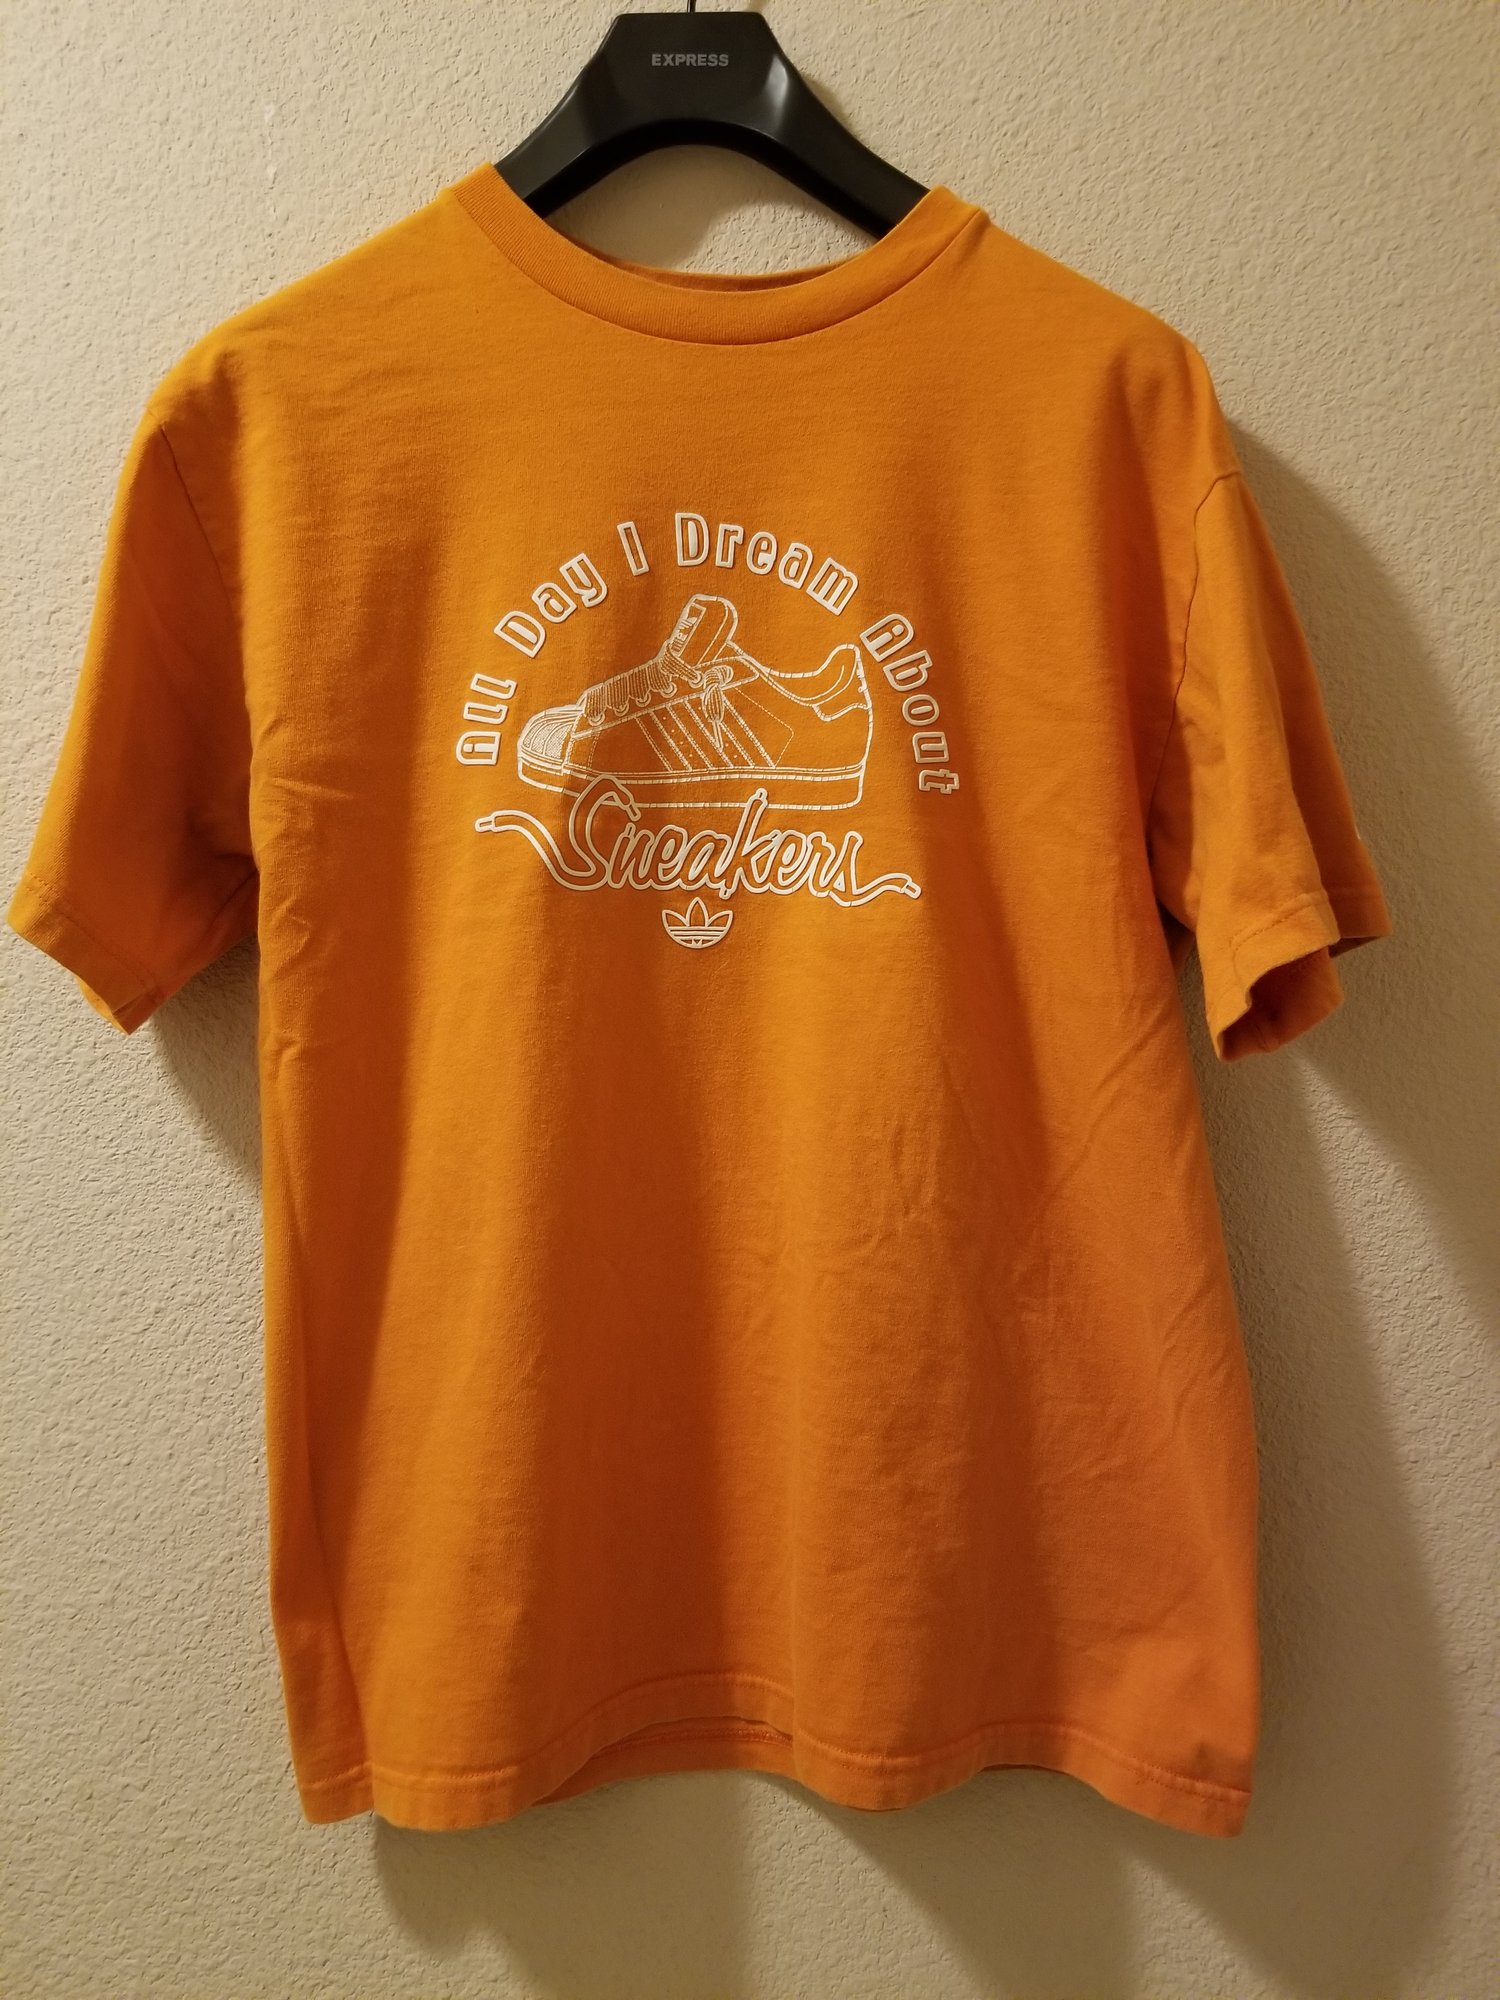 Adidas Dream About Sneakers Tee Size Medium